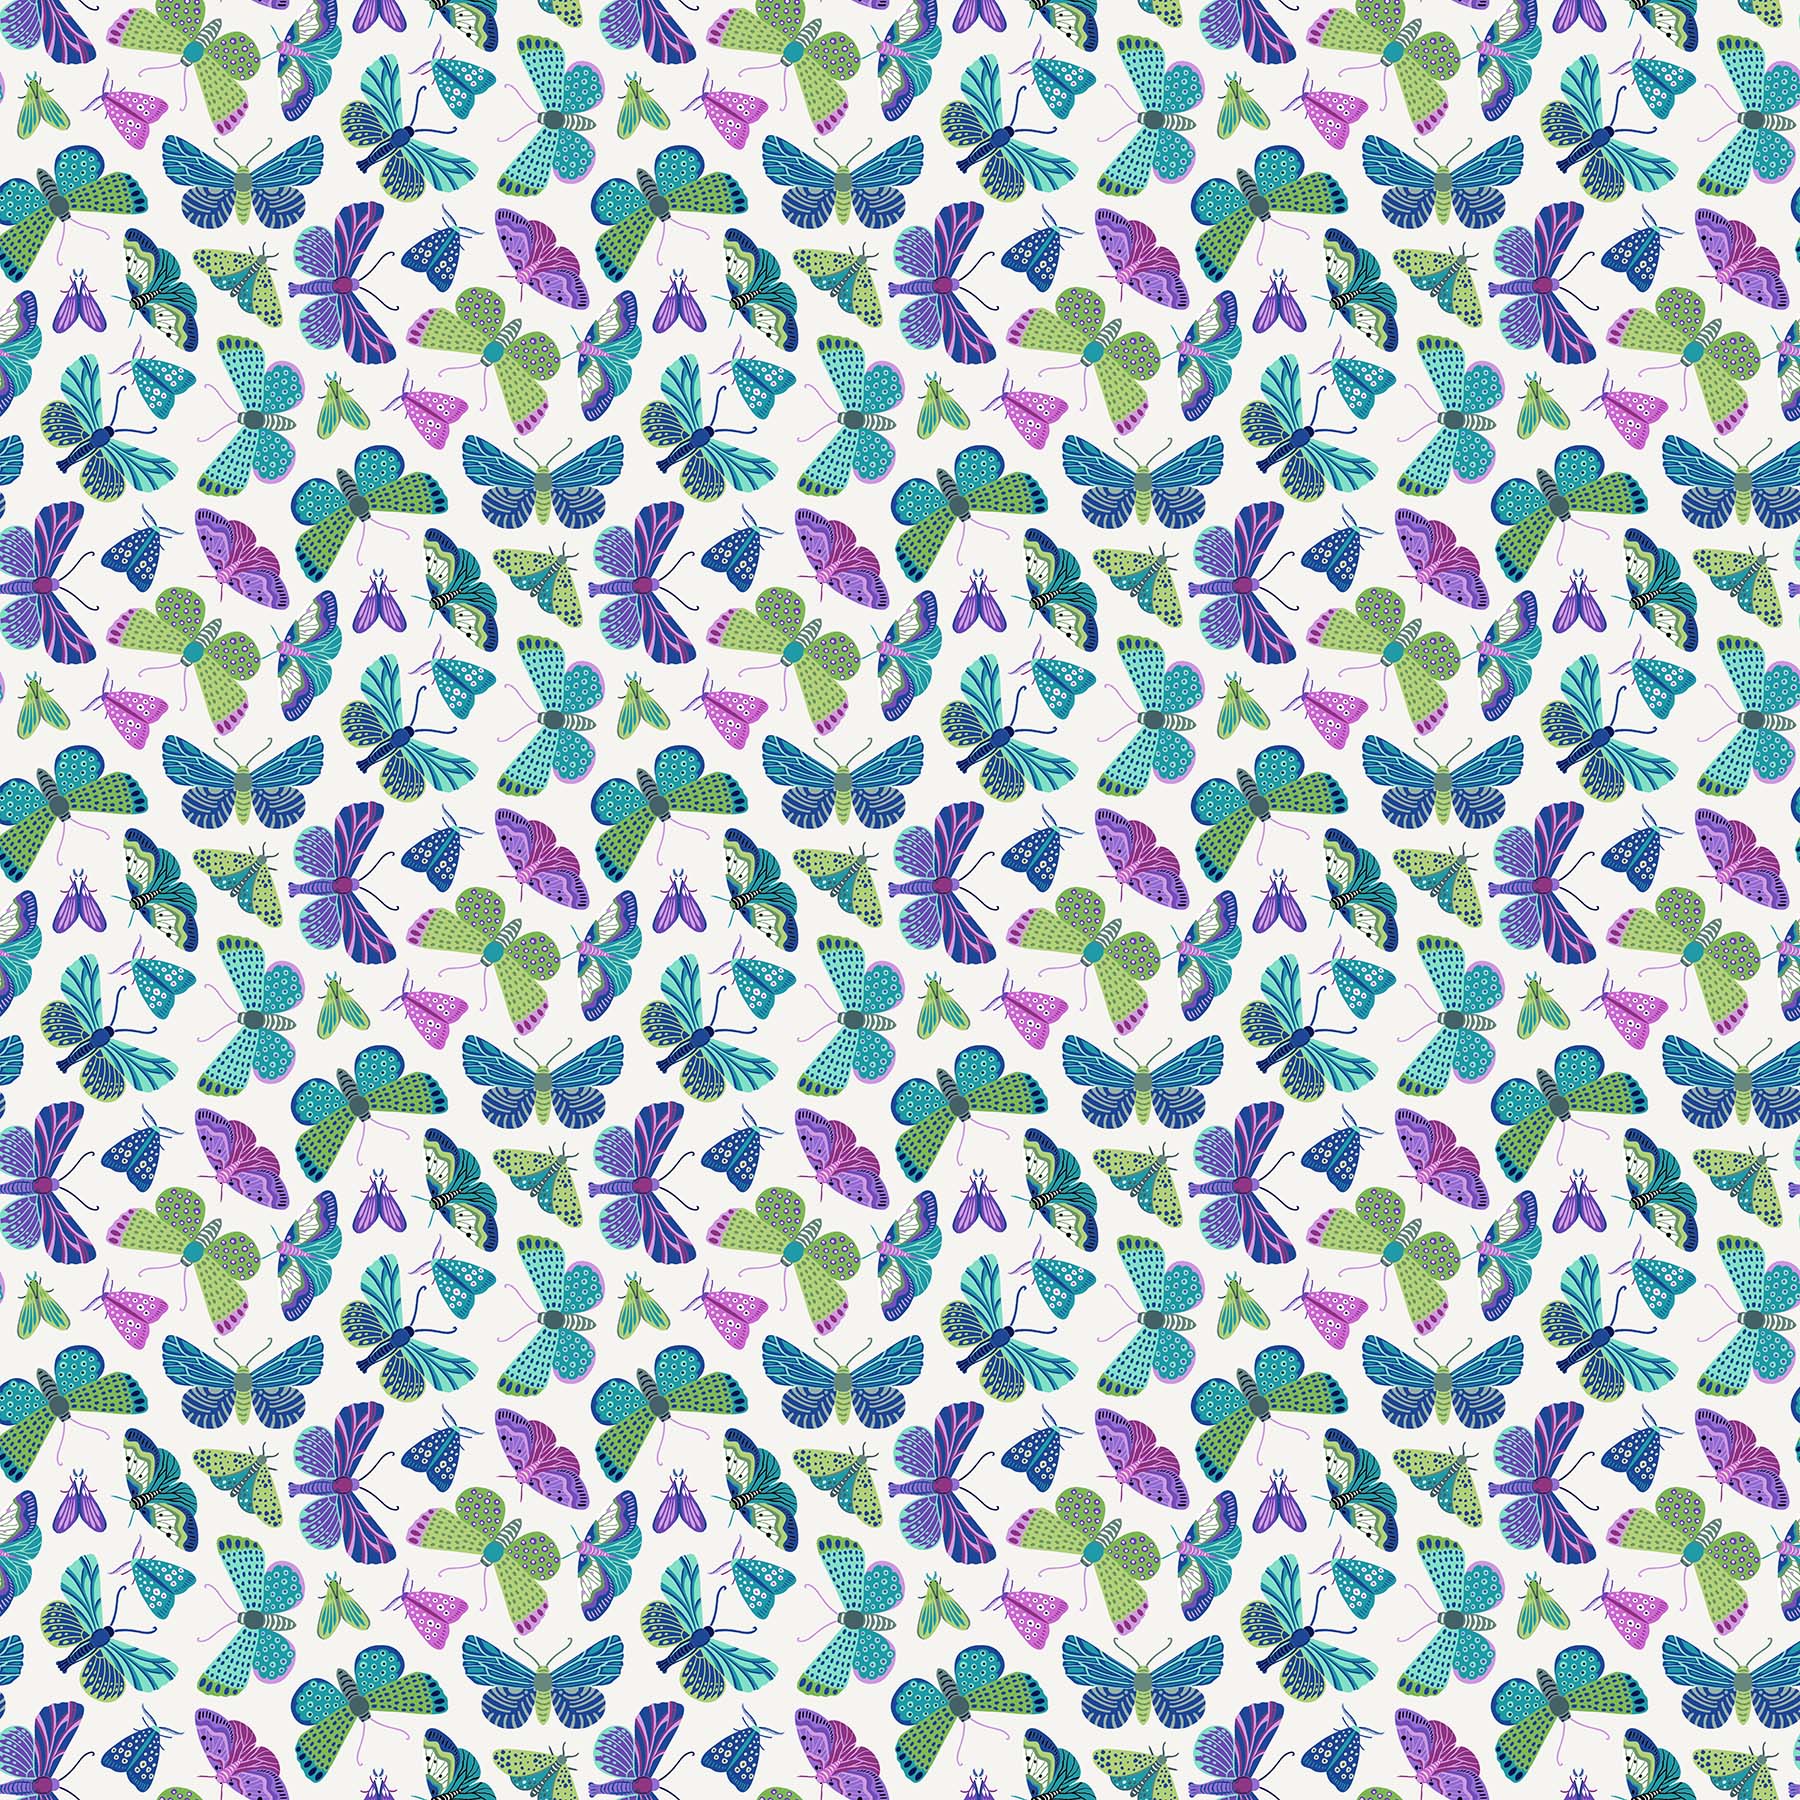 Waters Edge - 26713-11 - Cotton Fabric